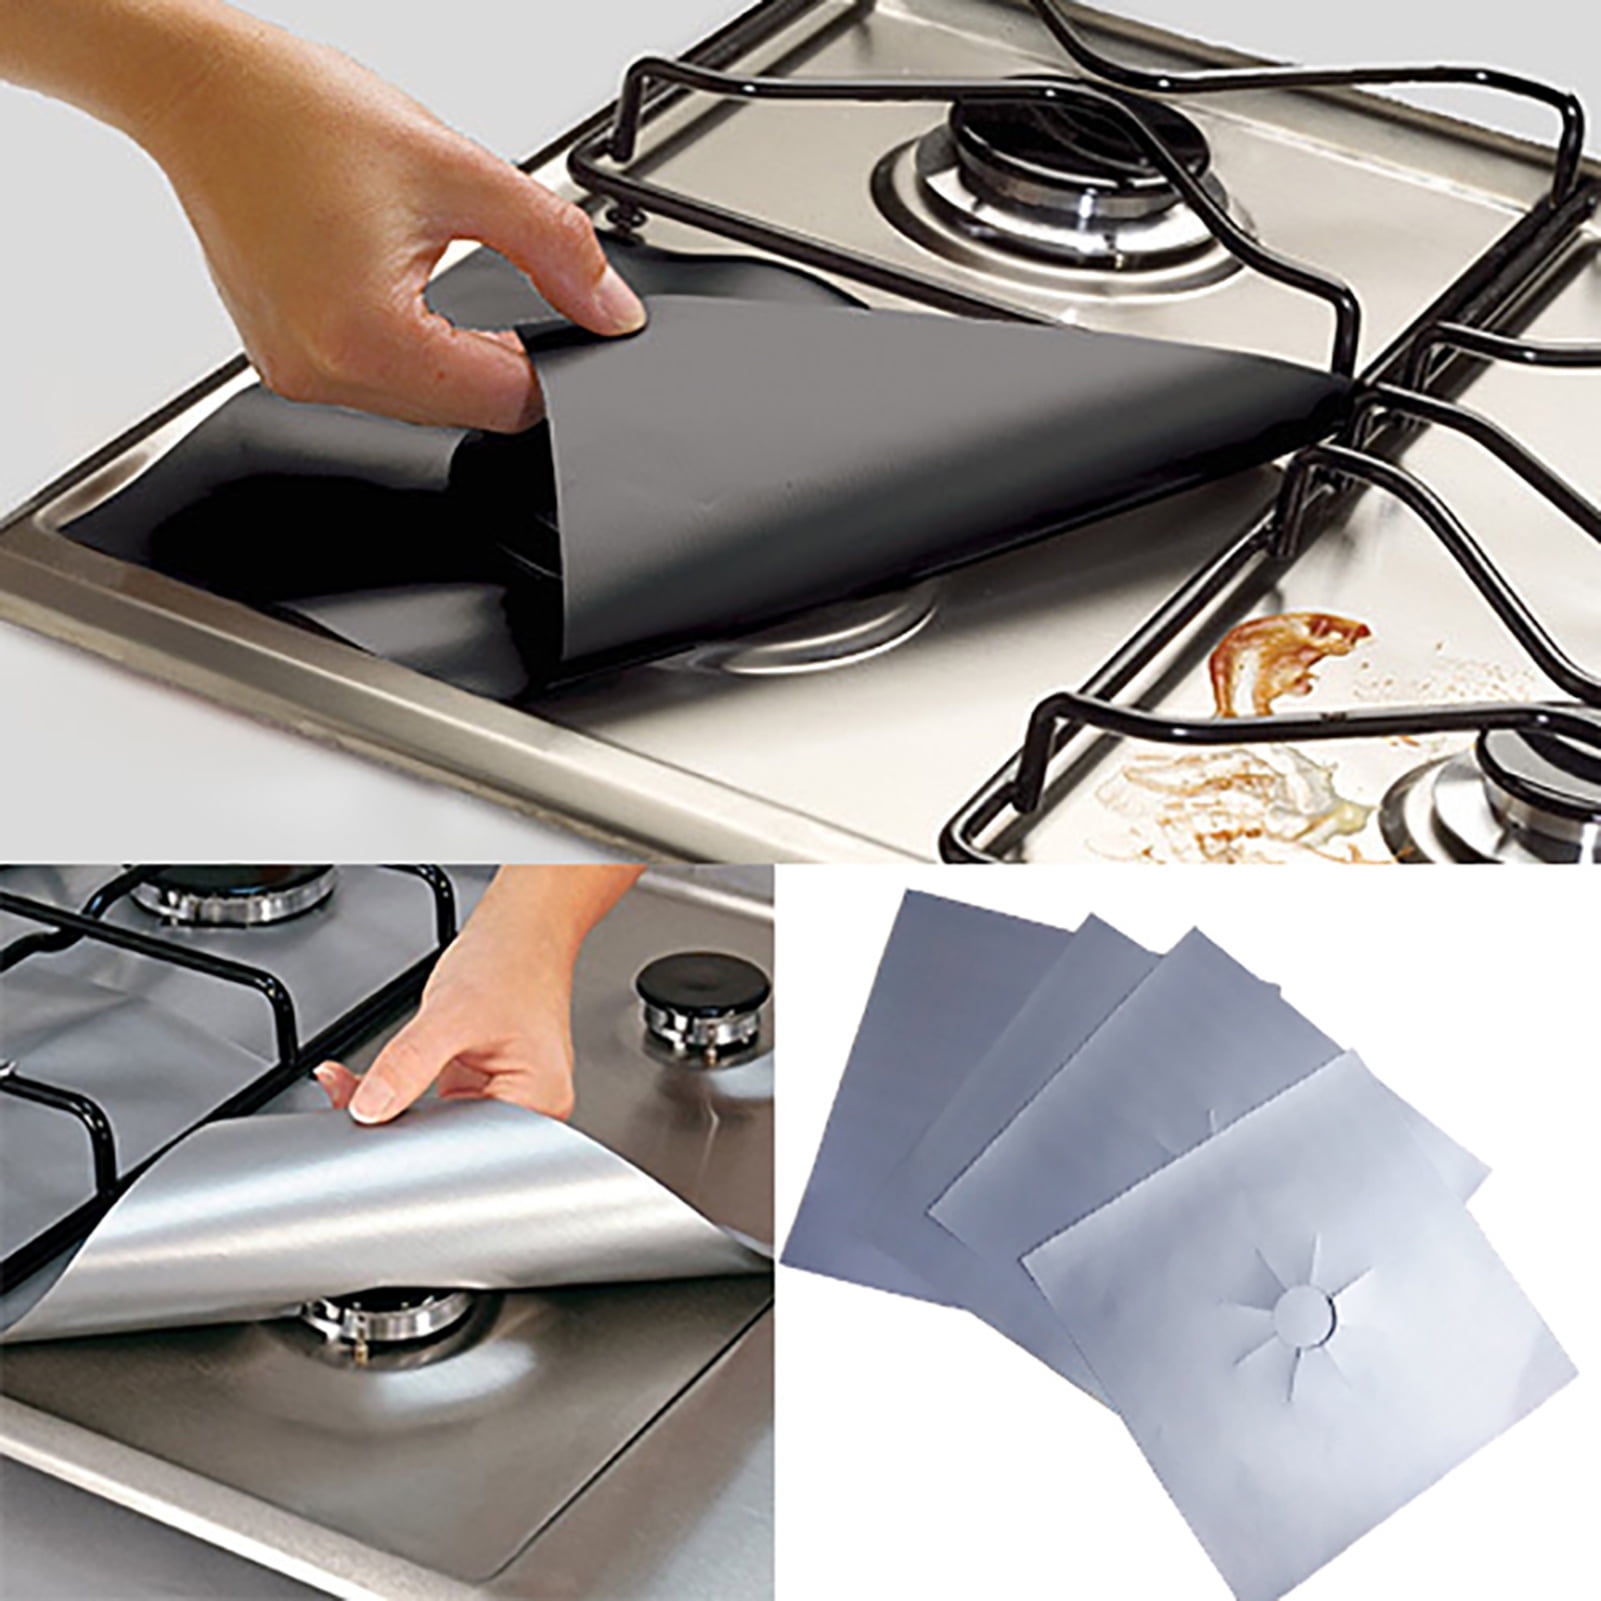 Skywin Stovetop Covers Spill, Protects GAS Range for Samsung GAS Ranges